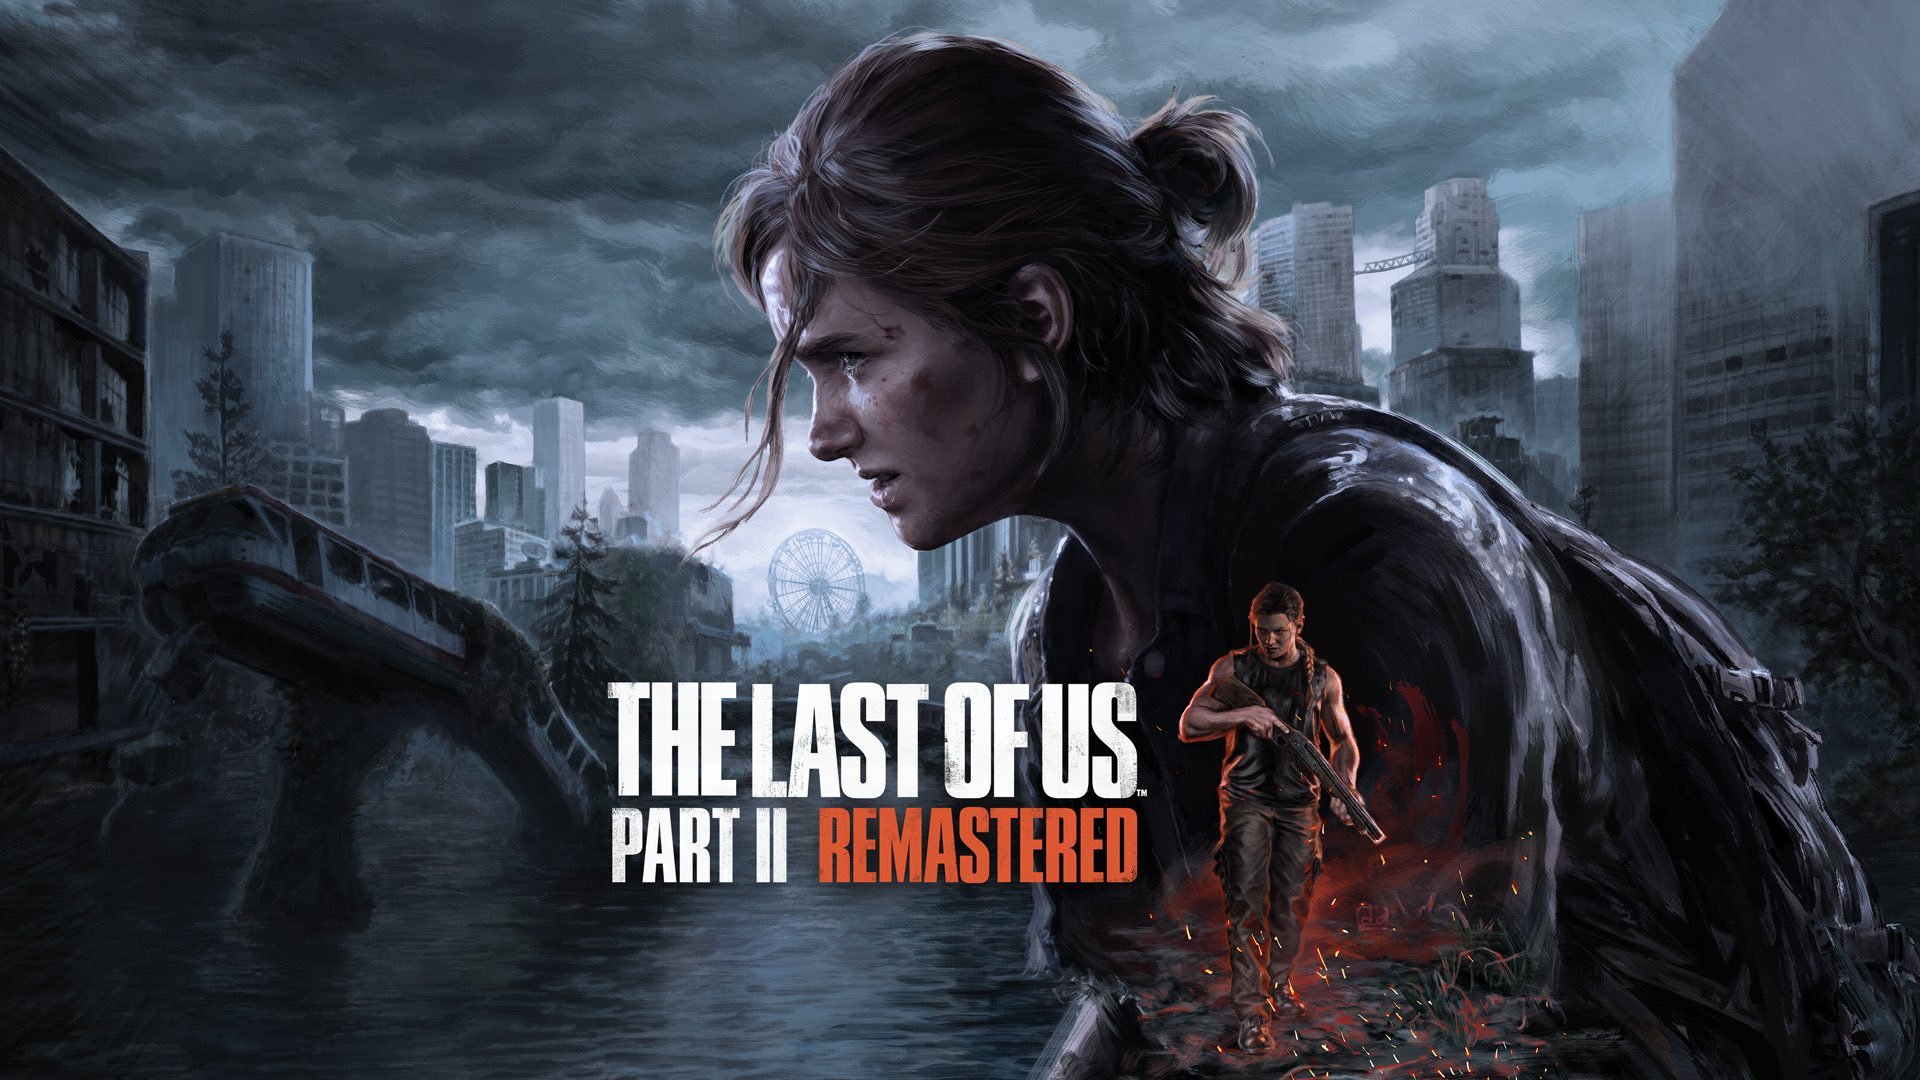 The Last of Us Part II Remastered - Release